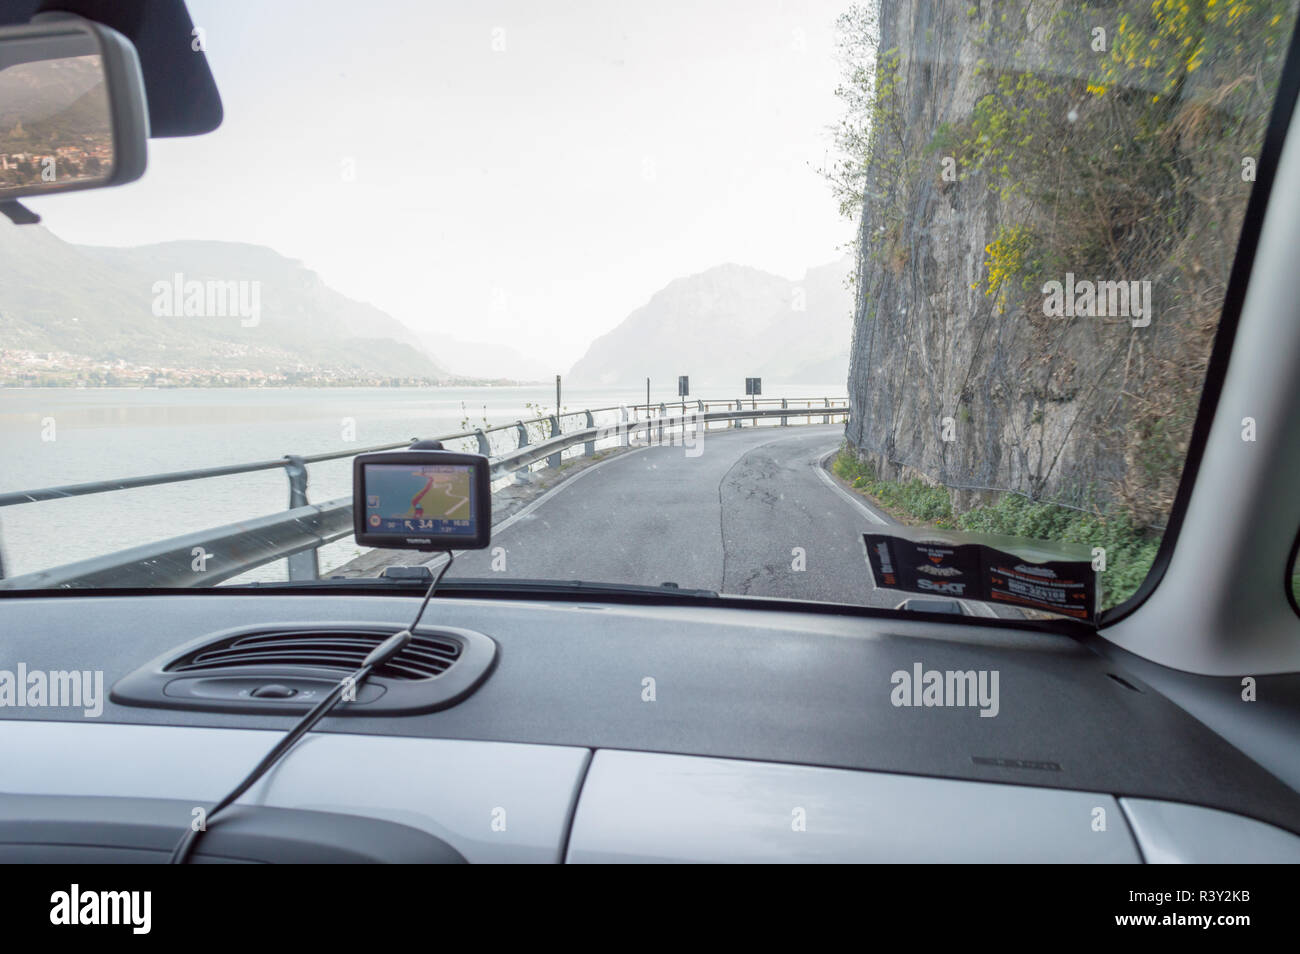 View through front window of a car. SIXT waiver and TomTom satnav sticking on the glass Stock Photo